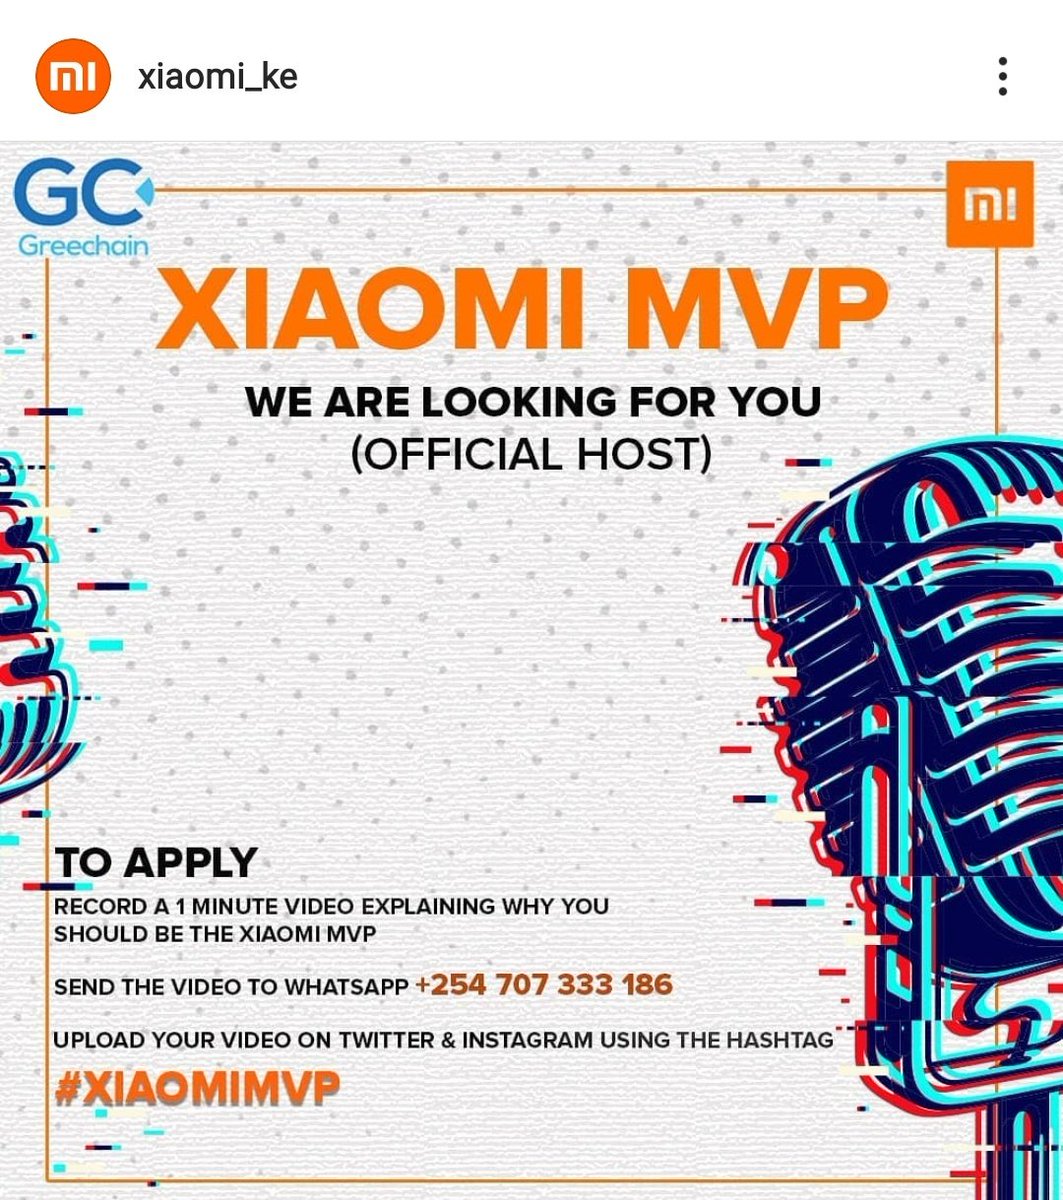 Xiaomi started a competition dubbed  #XiaomiMVP and they were looking looking to get an "official host for their show"A friend shared with me on Instagram via DM. I was idle a few days later so I was like, whatever mehn, might as well. 